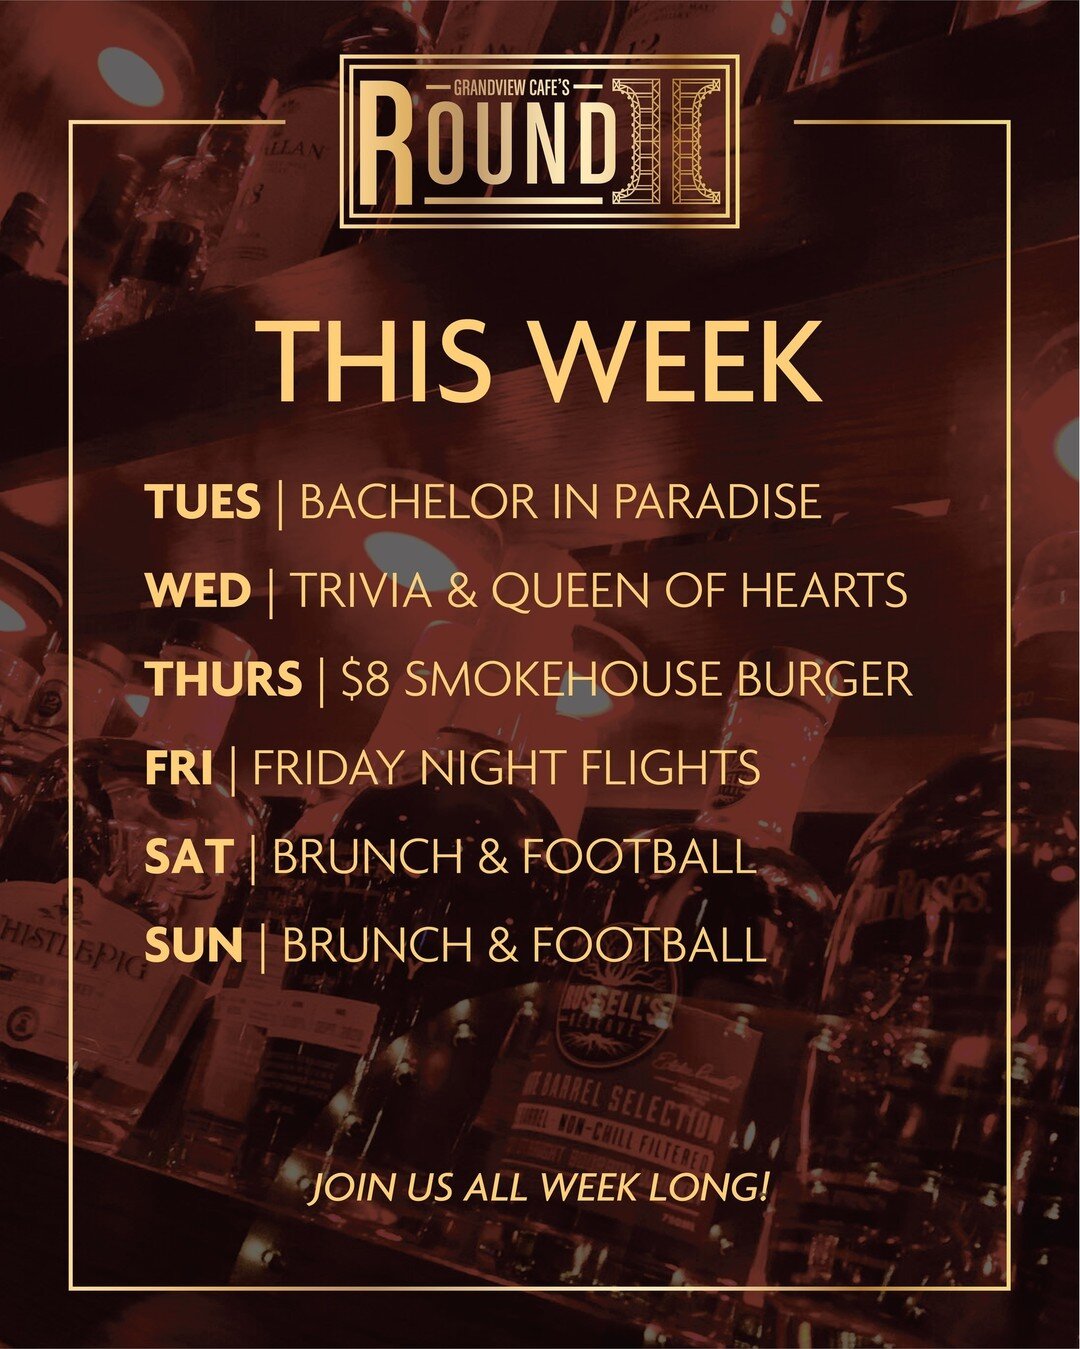 THIS WEEK | Take a look at our schedule coming up this week! Plenty of great reasons to come out and party with us. Plan ahead and join us all week long!

#thisweek #weekly #weeklyschedule #football #trivia #queenofhearts #fridaynight #brunch #suppor